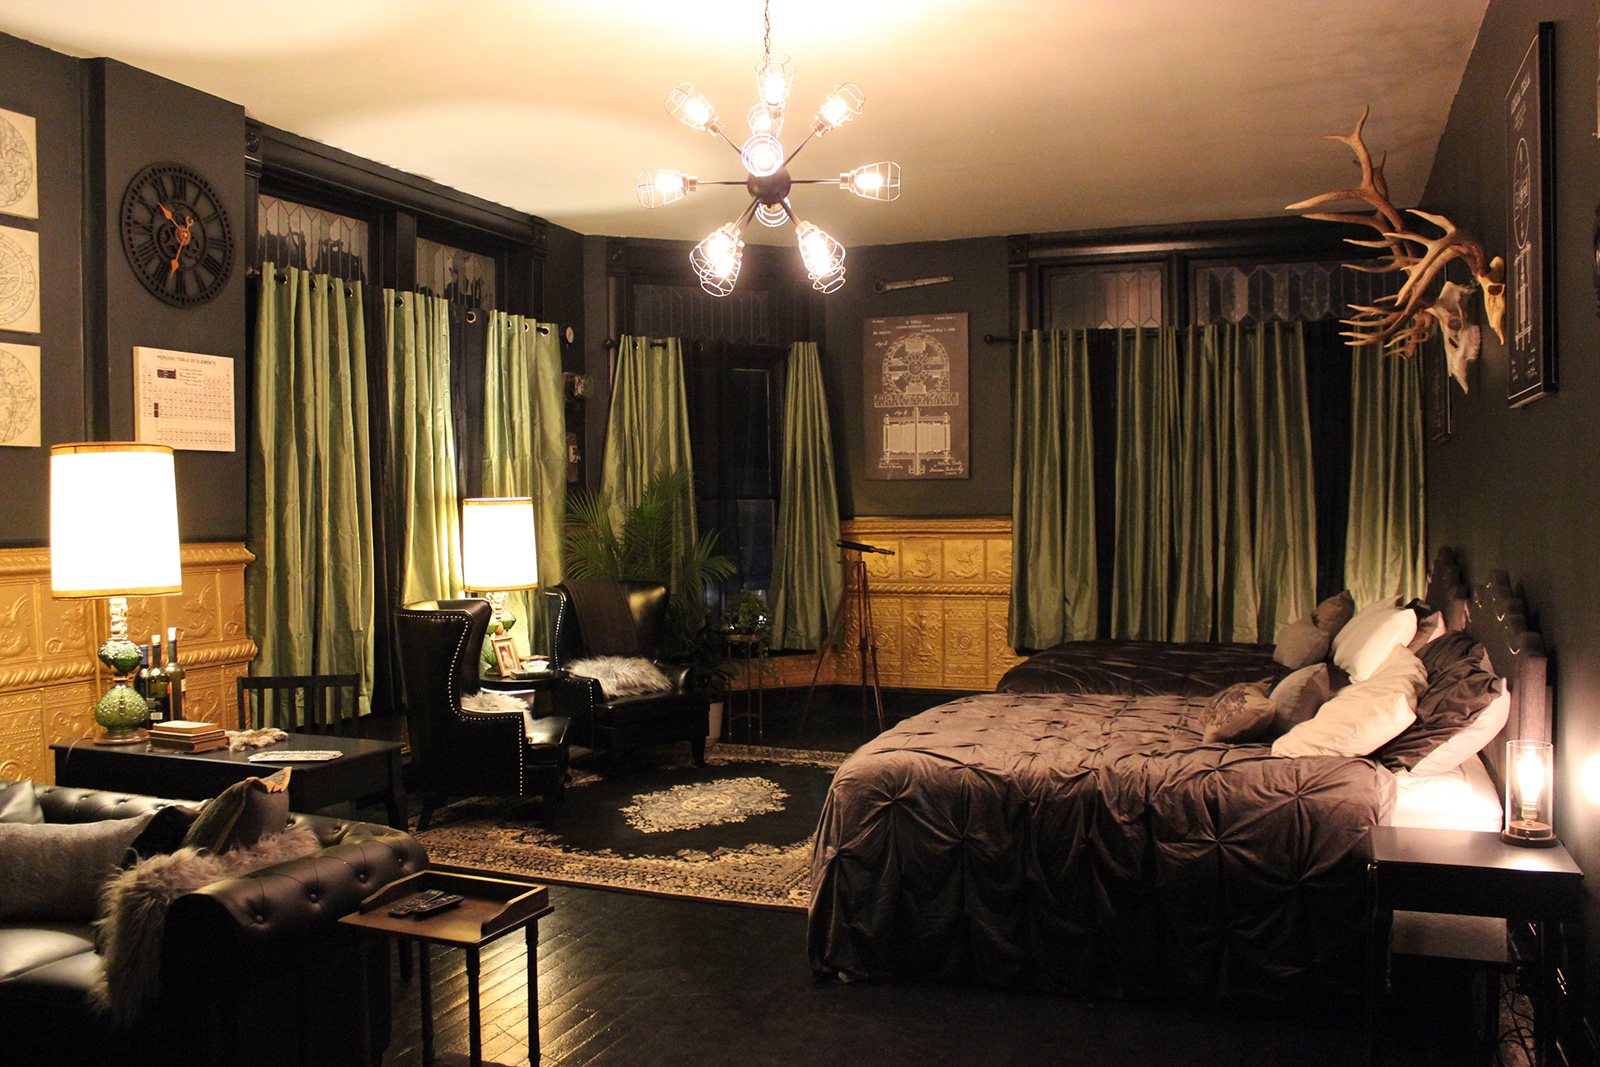 Would you stay at this ‘serial-killer themed’ Colorado Hotel?